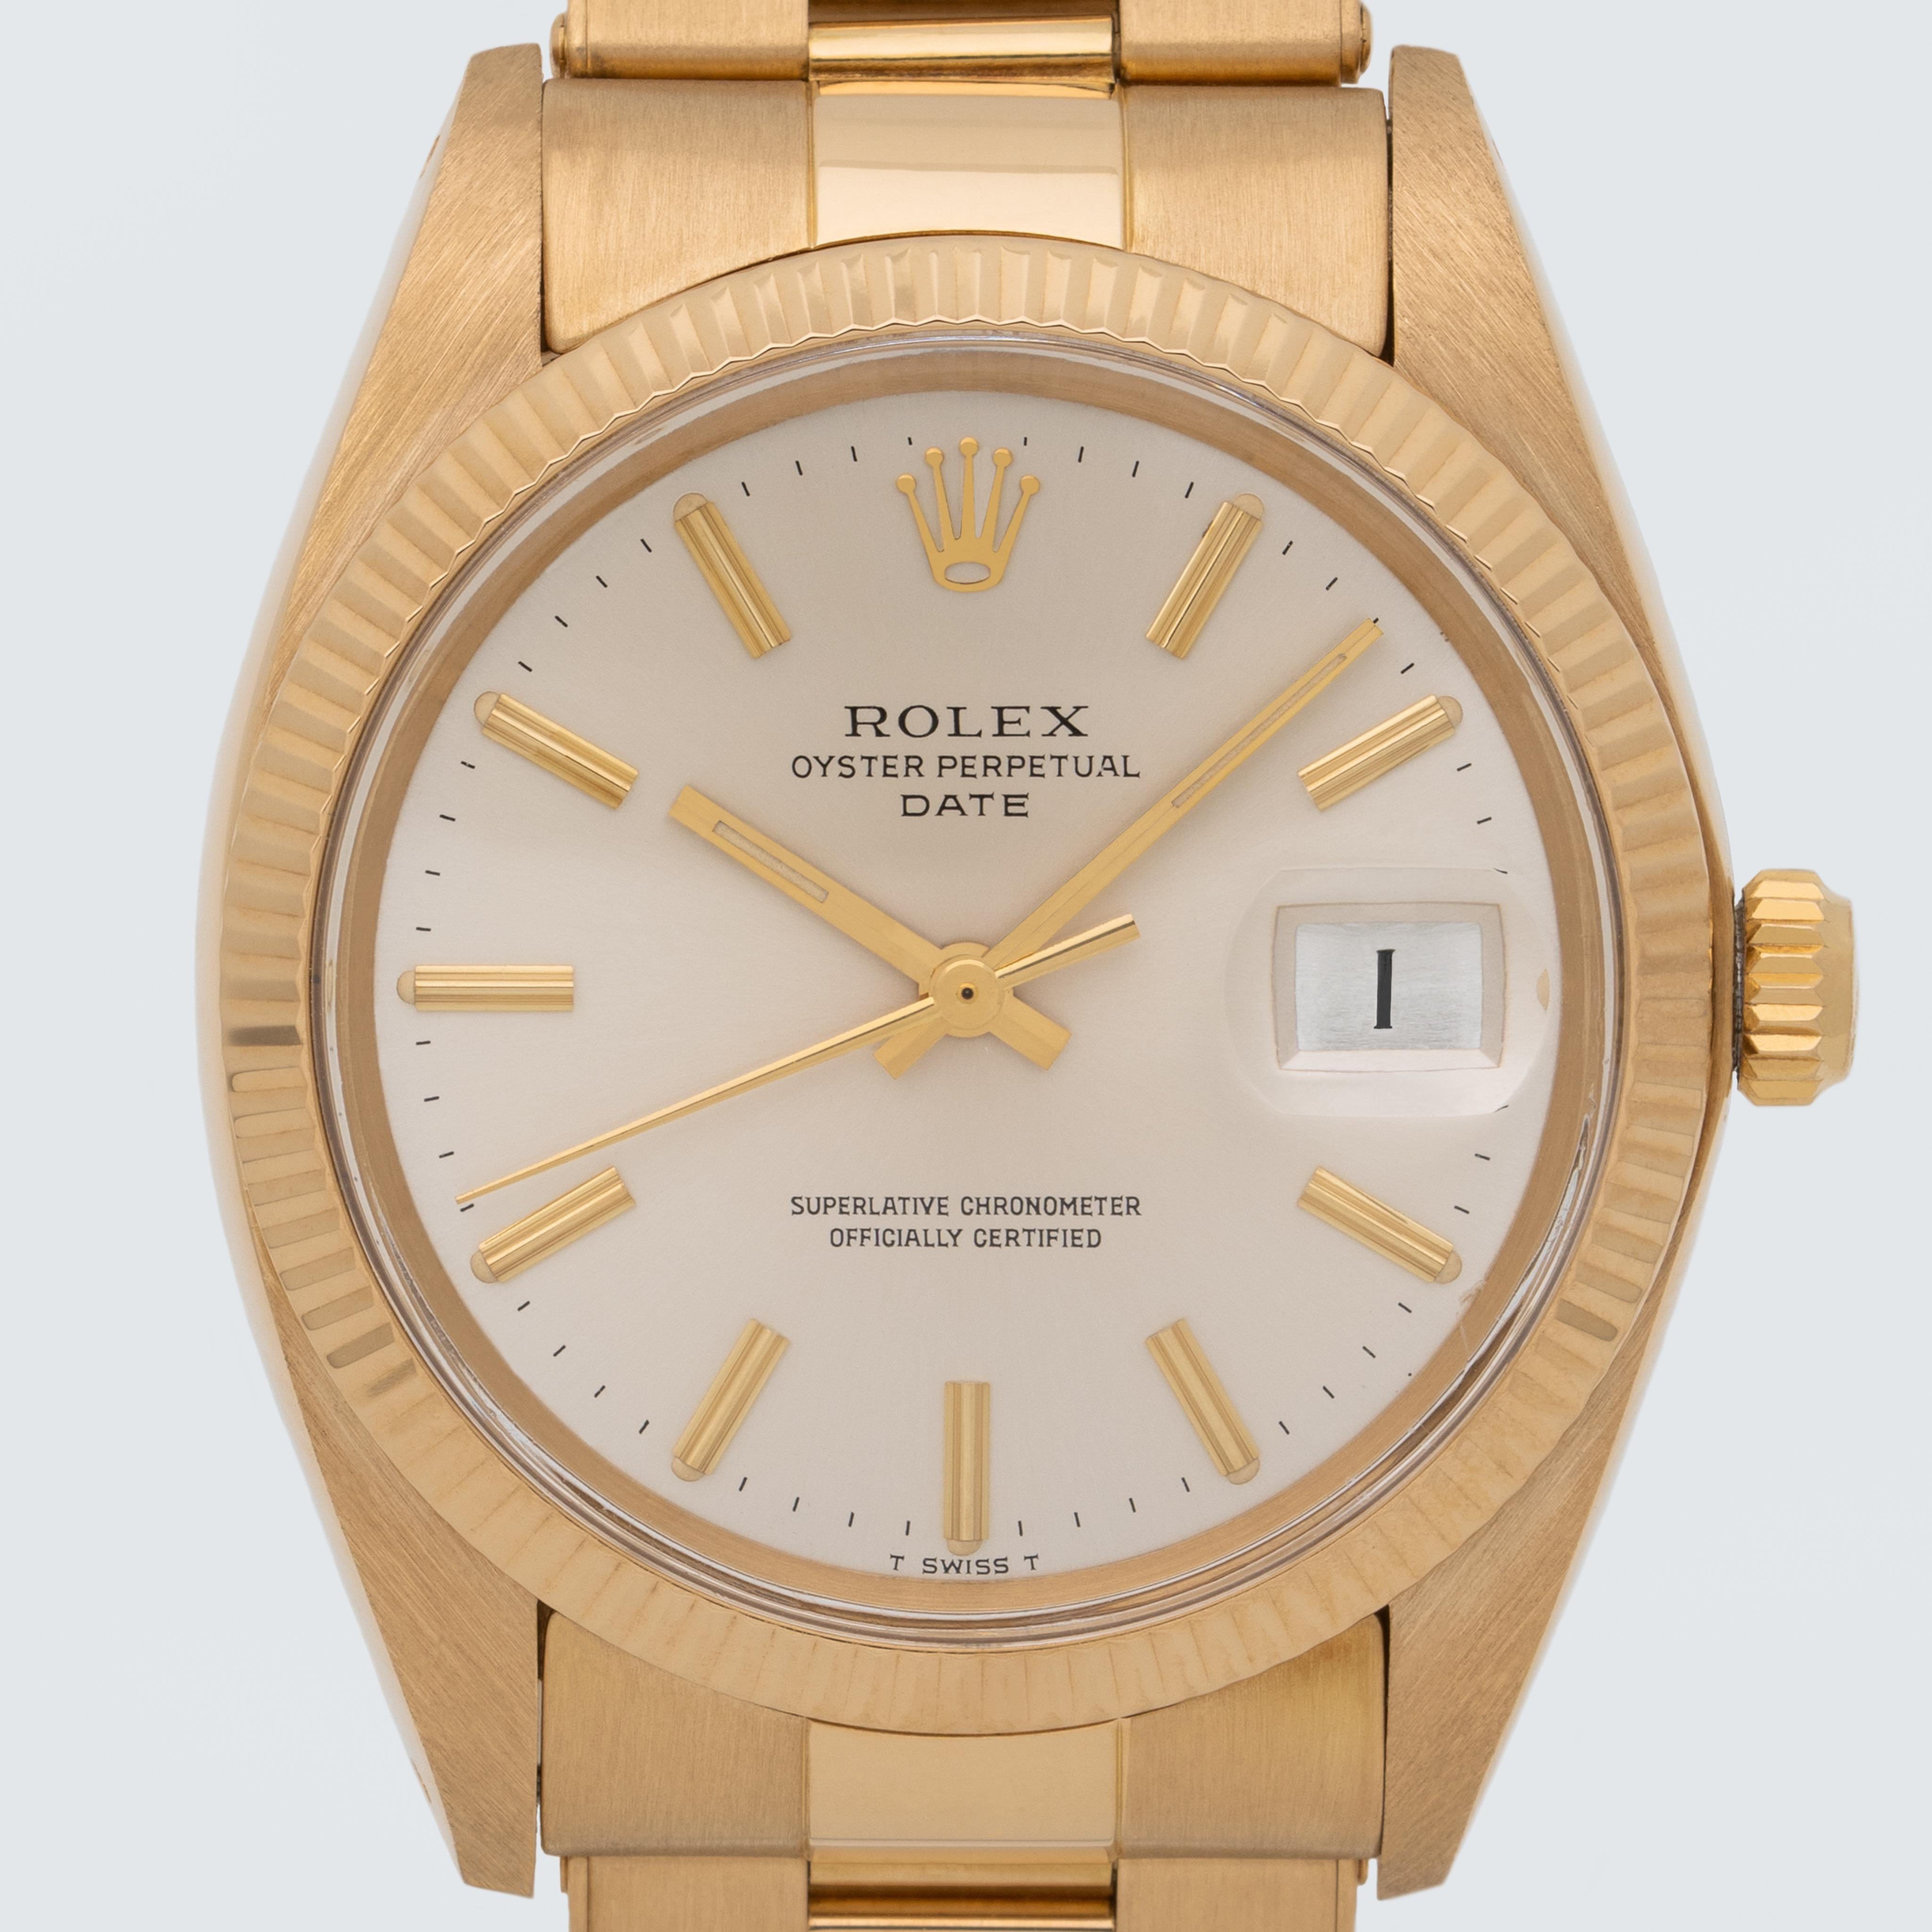 Rolex Perpetual Date 18k Yellow Gold, Automatic, Model 1503, Oyster Bracelet c. 1980

It’s always mildly ironic when a timepiece has an air of timelessness about it. It is especially so when the timepiece in question happens to be the Rolex